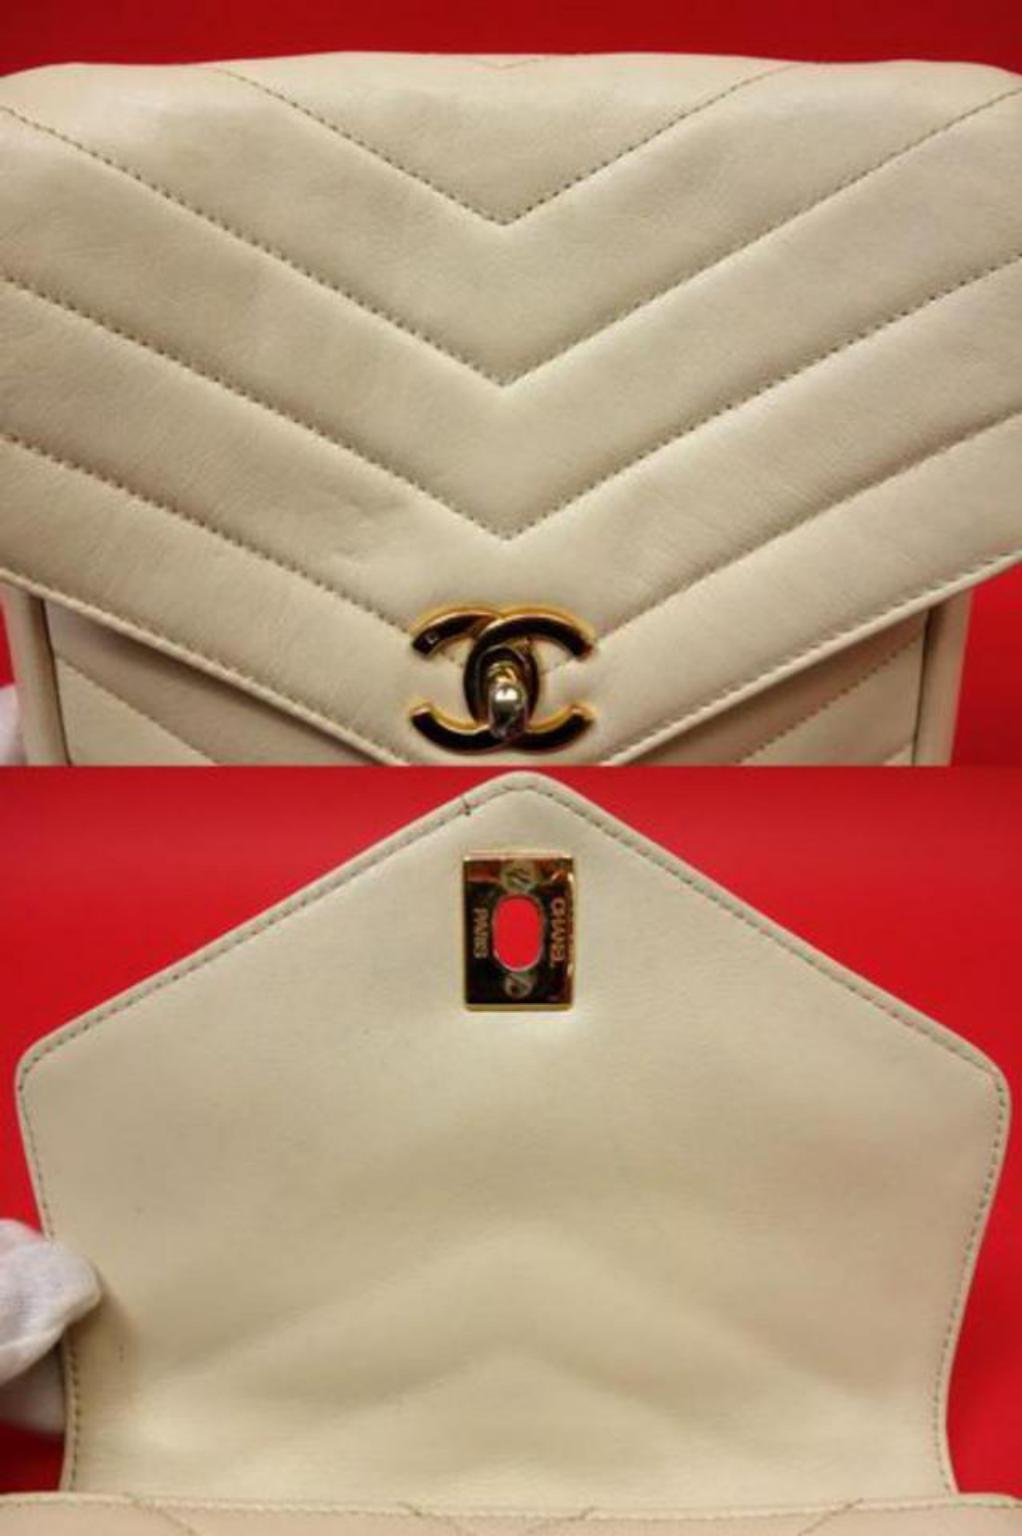 Chanel Chevron Quilted Lambskin Mini Flap 224211 Beige Leather Cross Body Bag In Good Condition For Sale In Forest Hills, NY